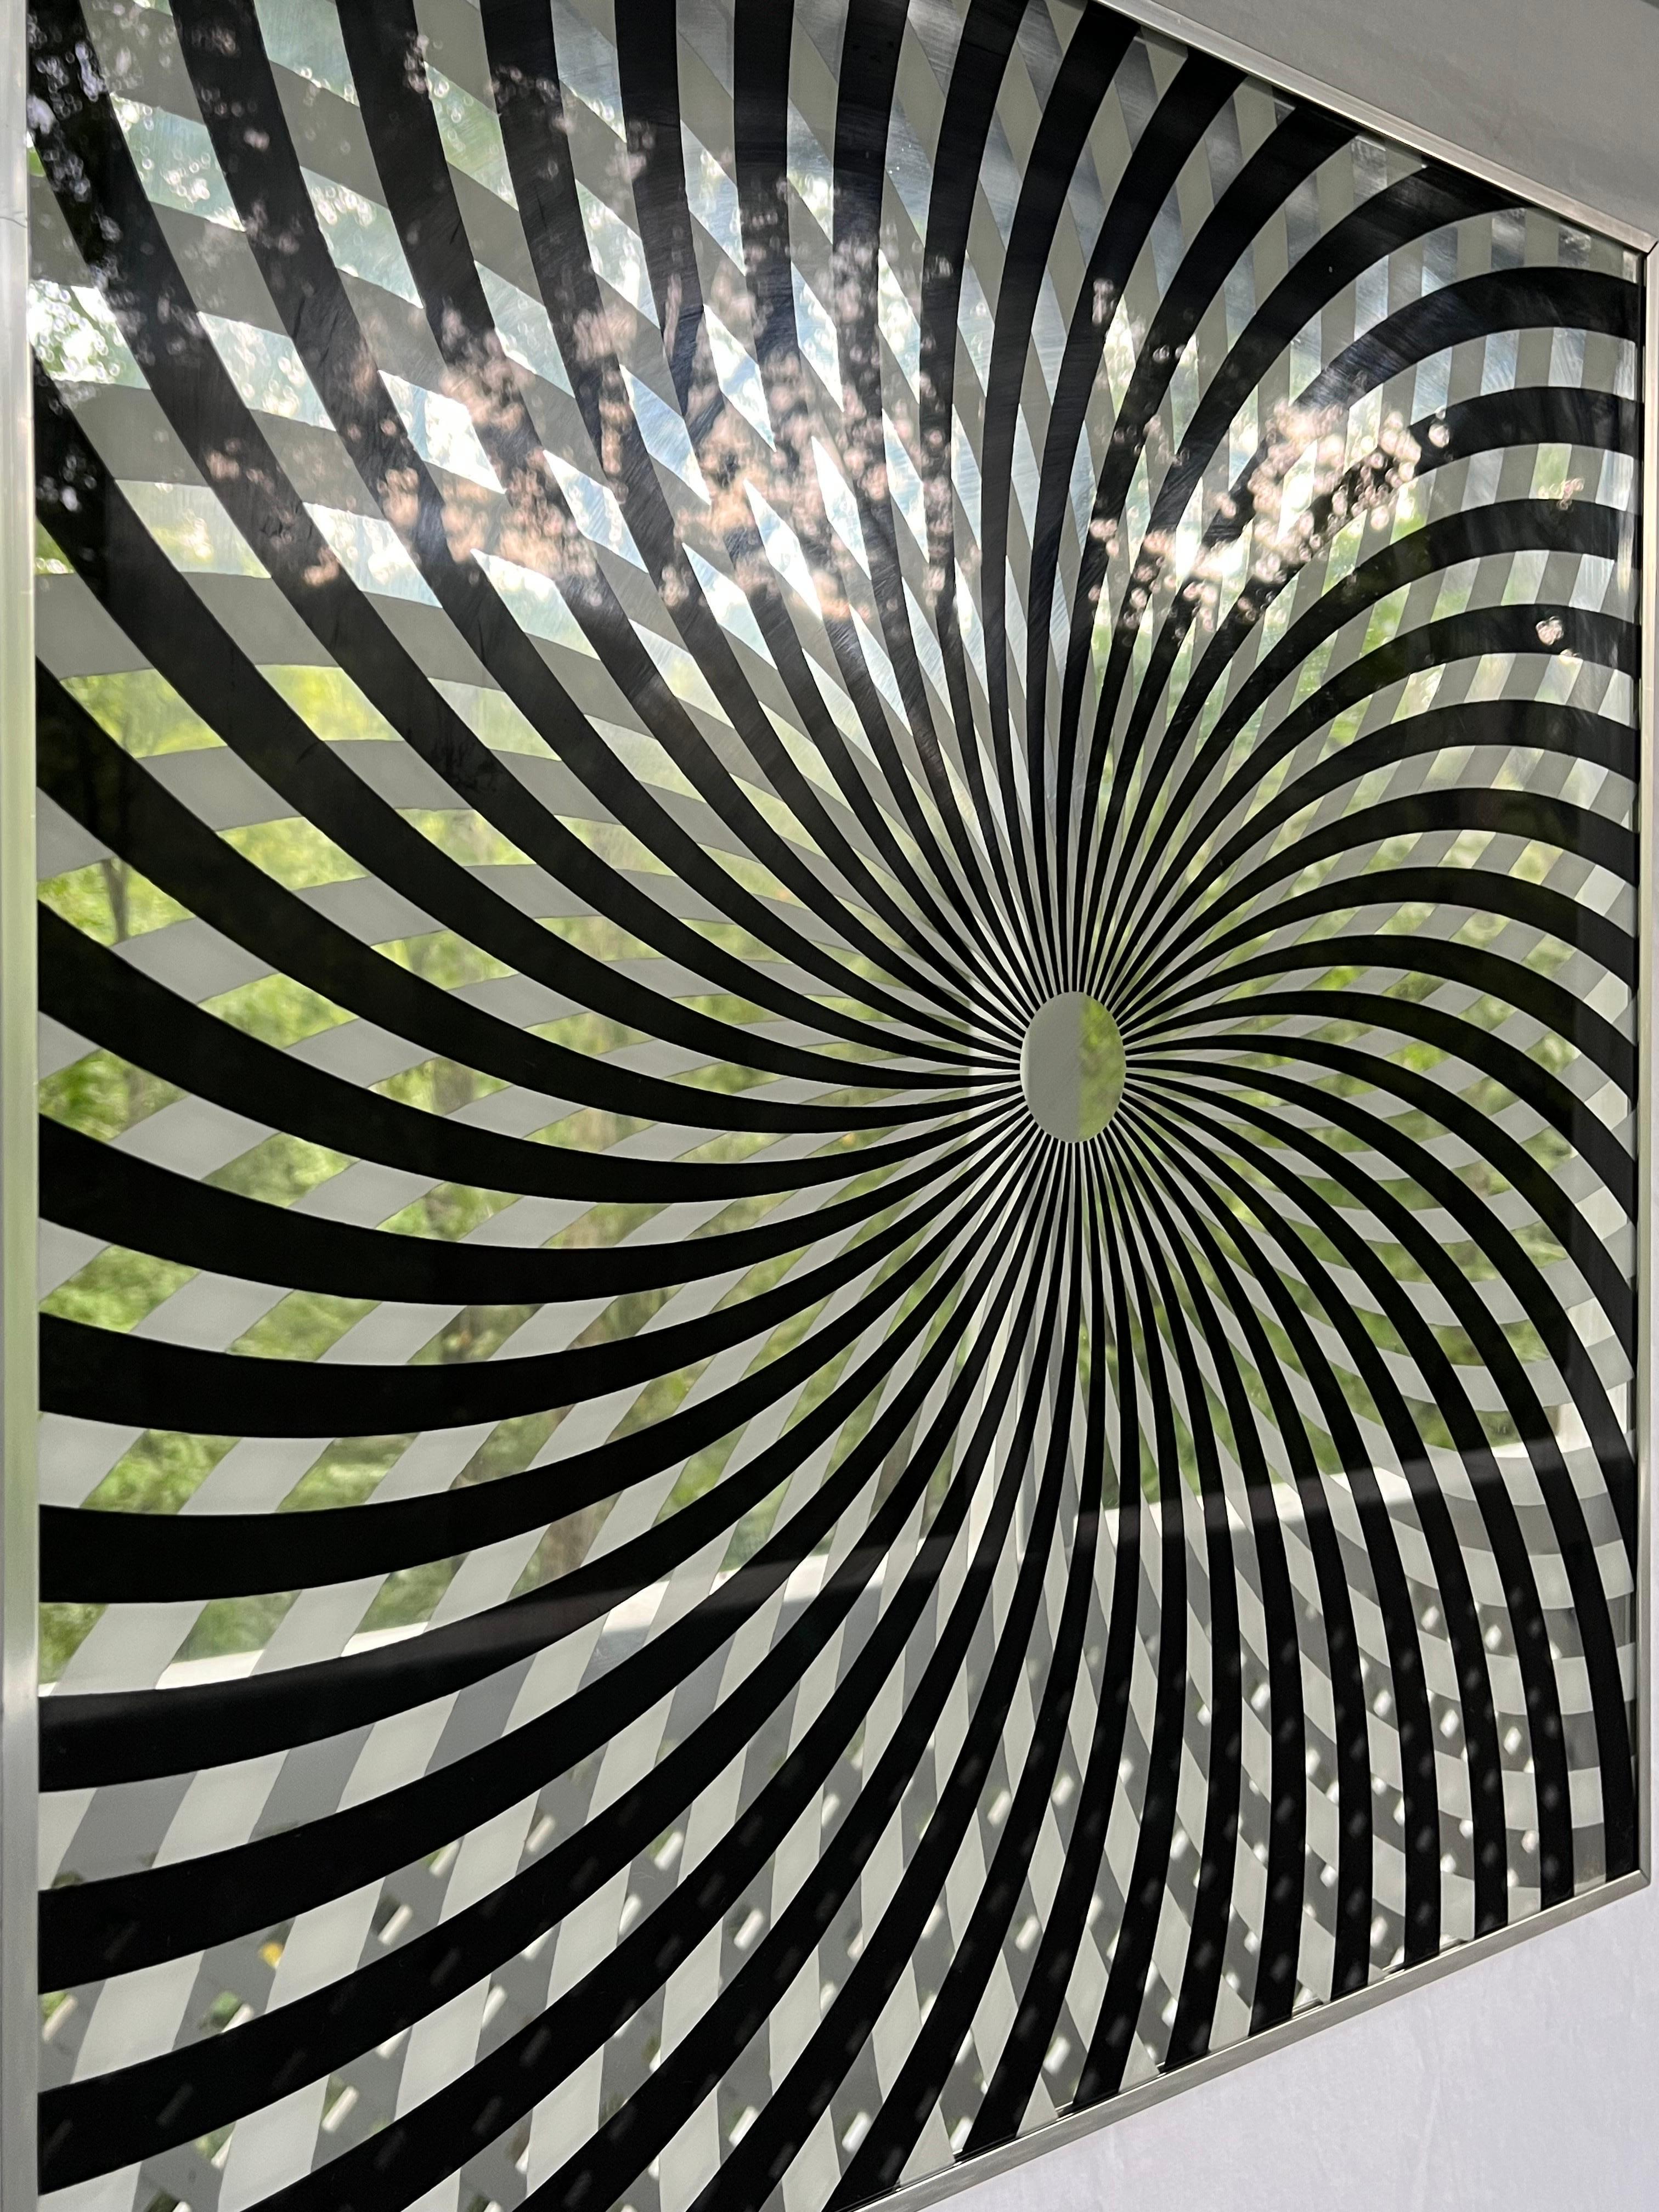 A vintage 1970's op art style square mirror presented in an aluminum frame by the Chicago based Turner Manufacturing Company. The black and white graphic, pop art style pinwheel or kaleidoscope design epitomizes all that was in the 1970's. This